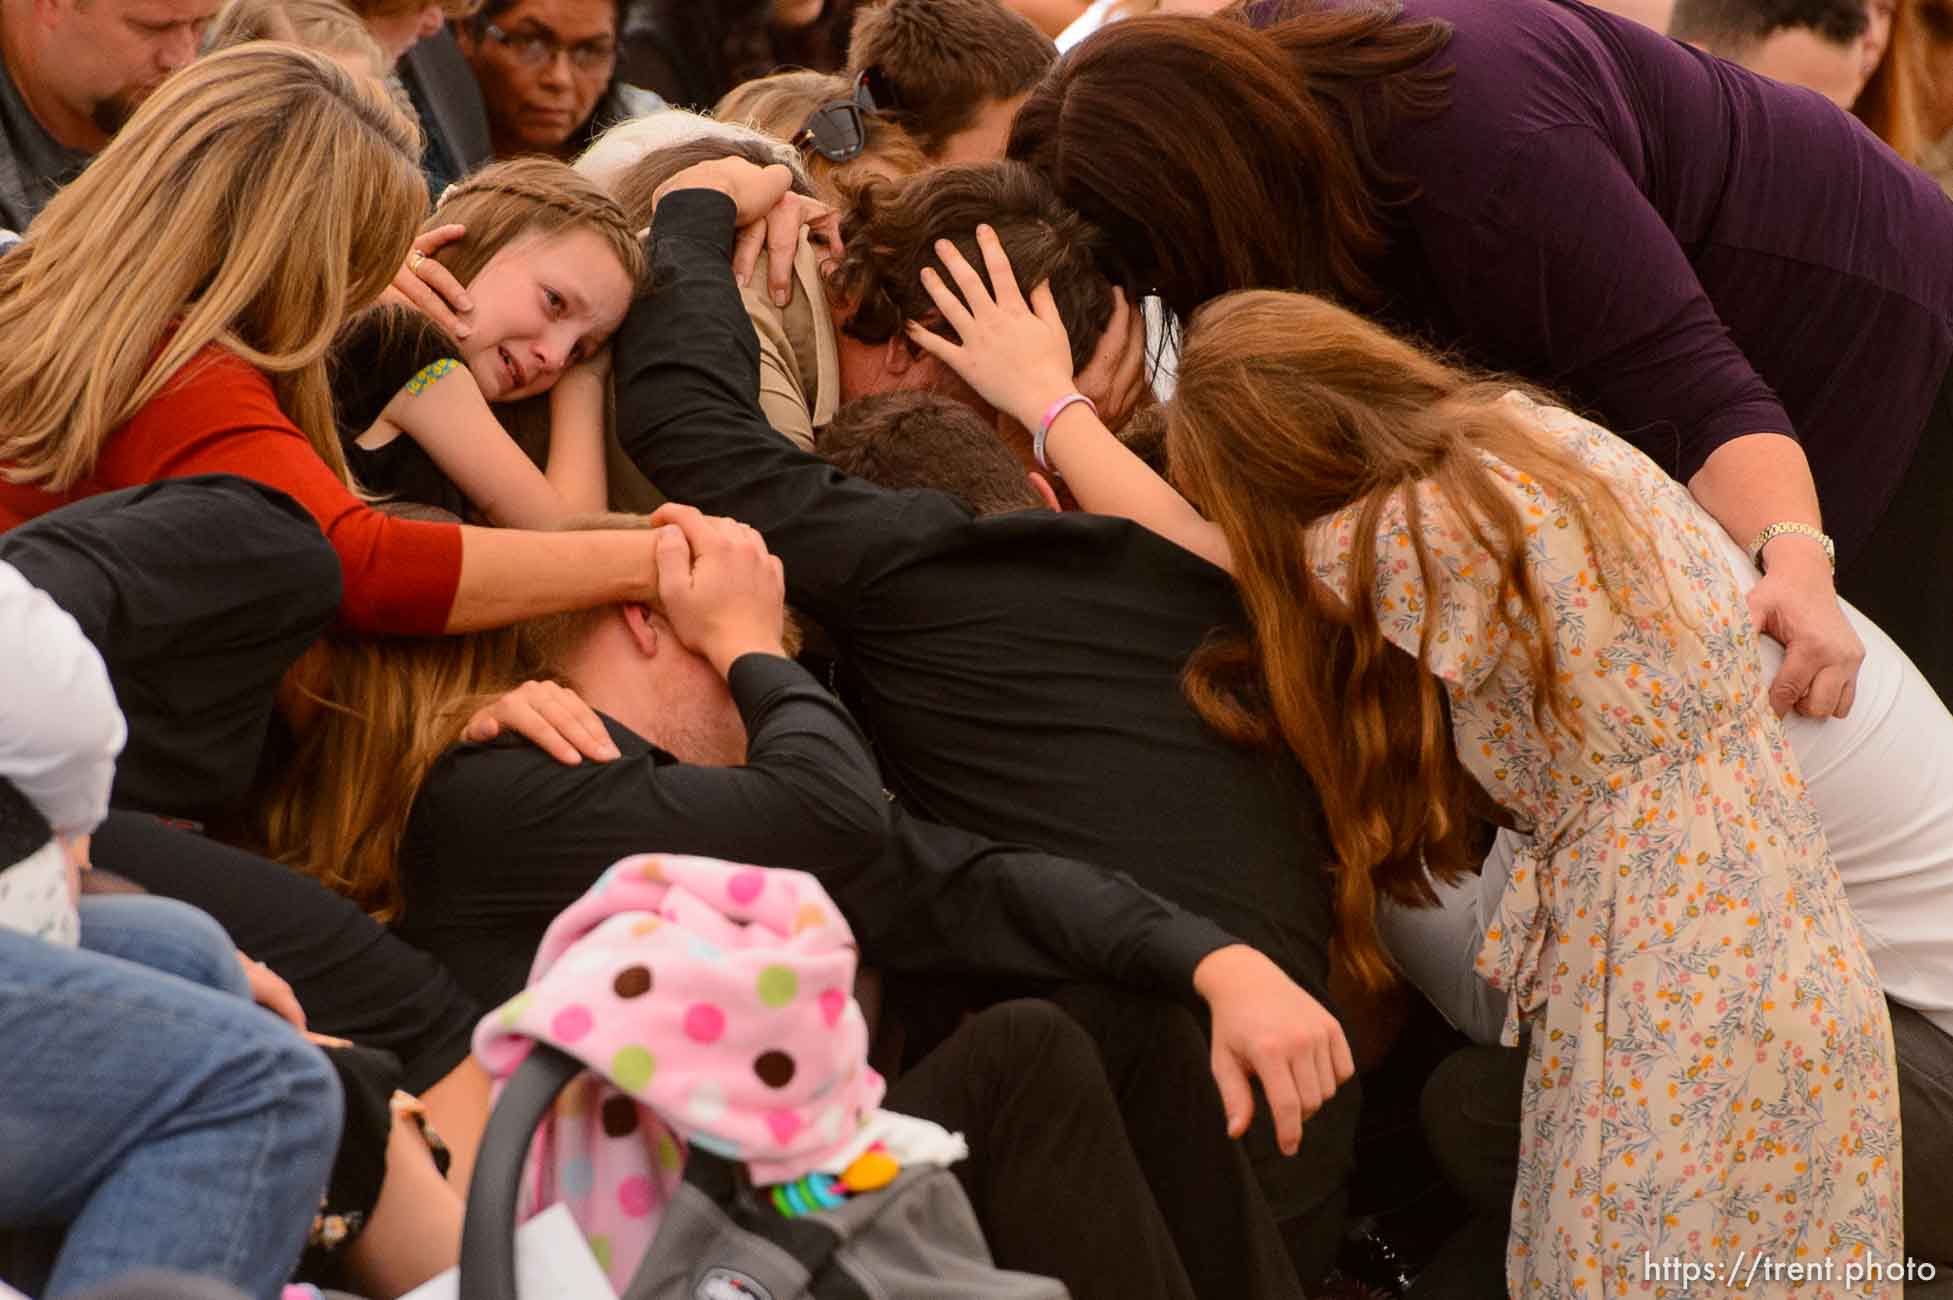 (Trent Nelson  |  The Salt Lake Tribune)
David Langford's family embraces each other during the closing hymn at the funeral for Dawna Langford and two of her children, Trevor and Rogan, in La Mora, Sonora on Thursday Nov. 7, 2019.